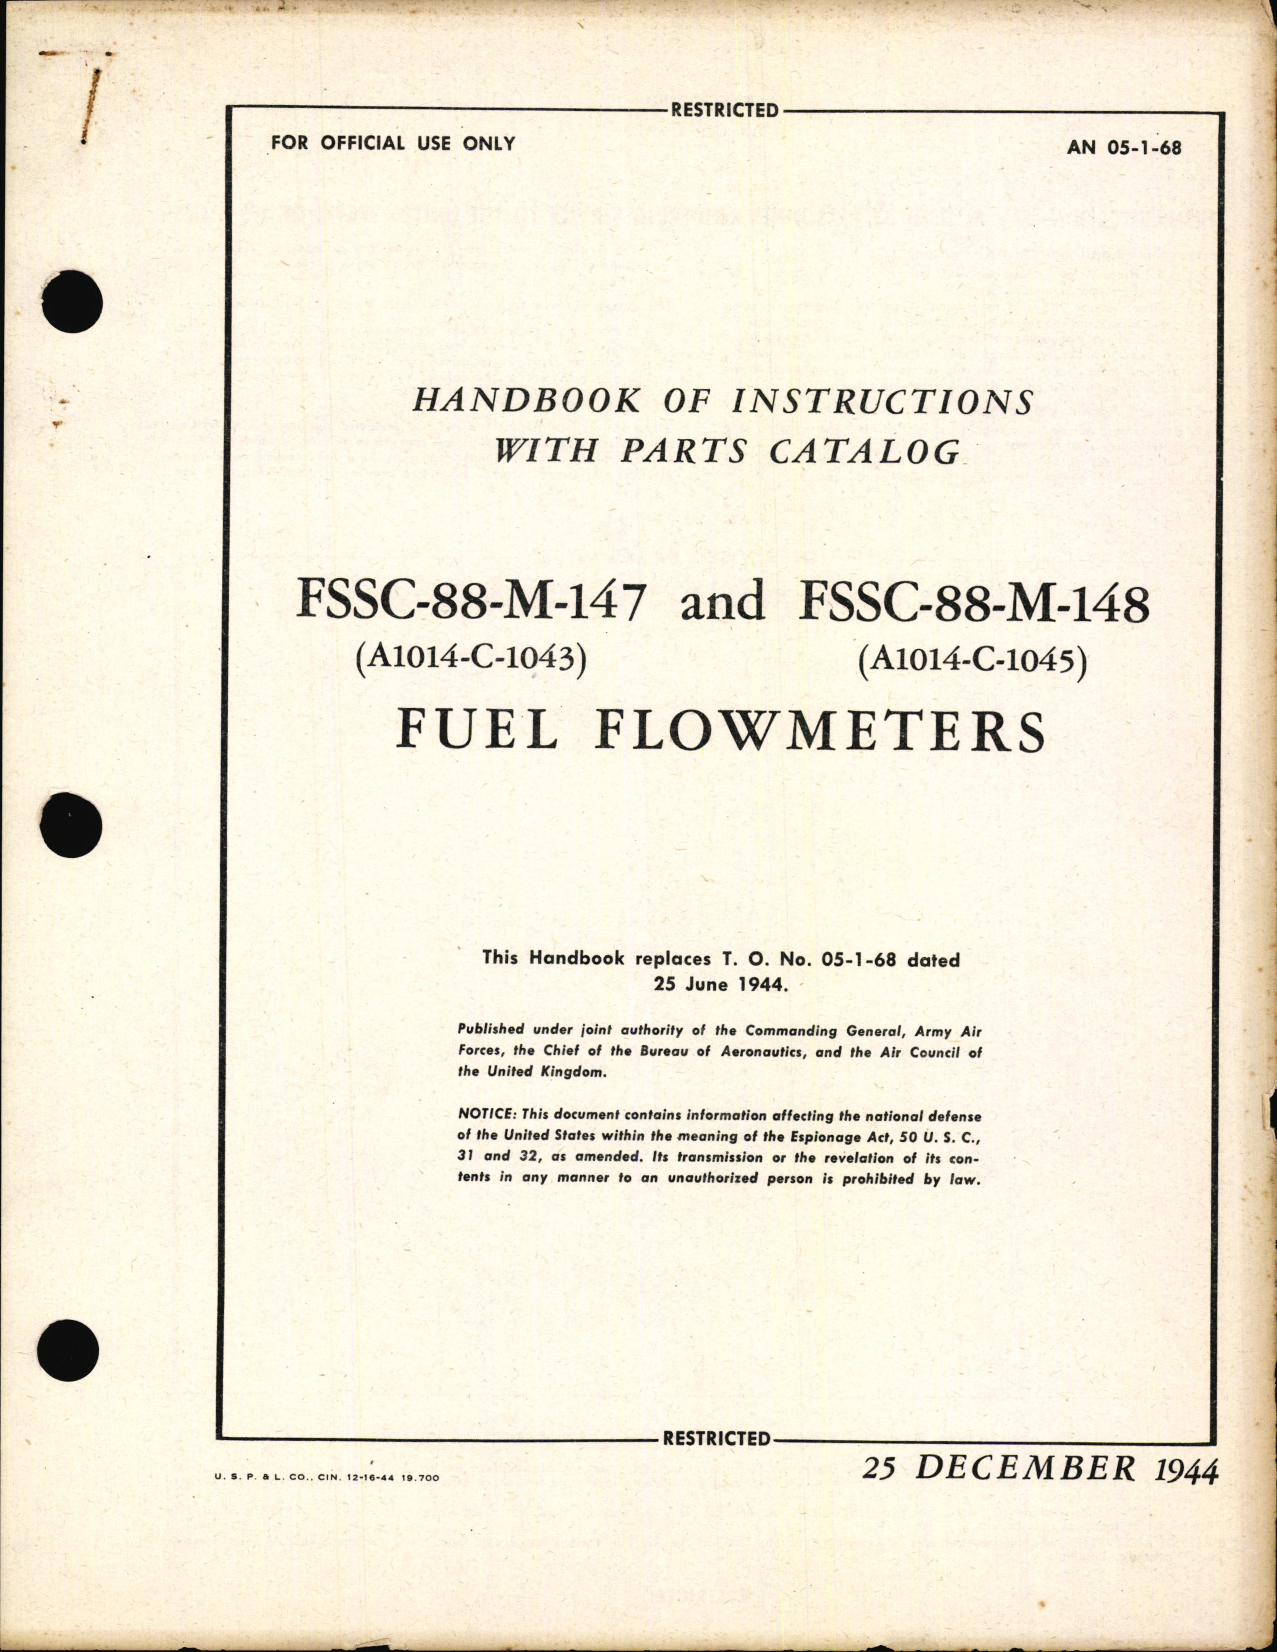 Sample page 1 from AirCorps Library document: Handbook of Instructions with Parts Catalog for FSSC-88-M-147 and FSSC-88-M-148 Fuel Flowmeters